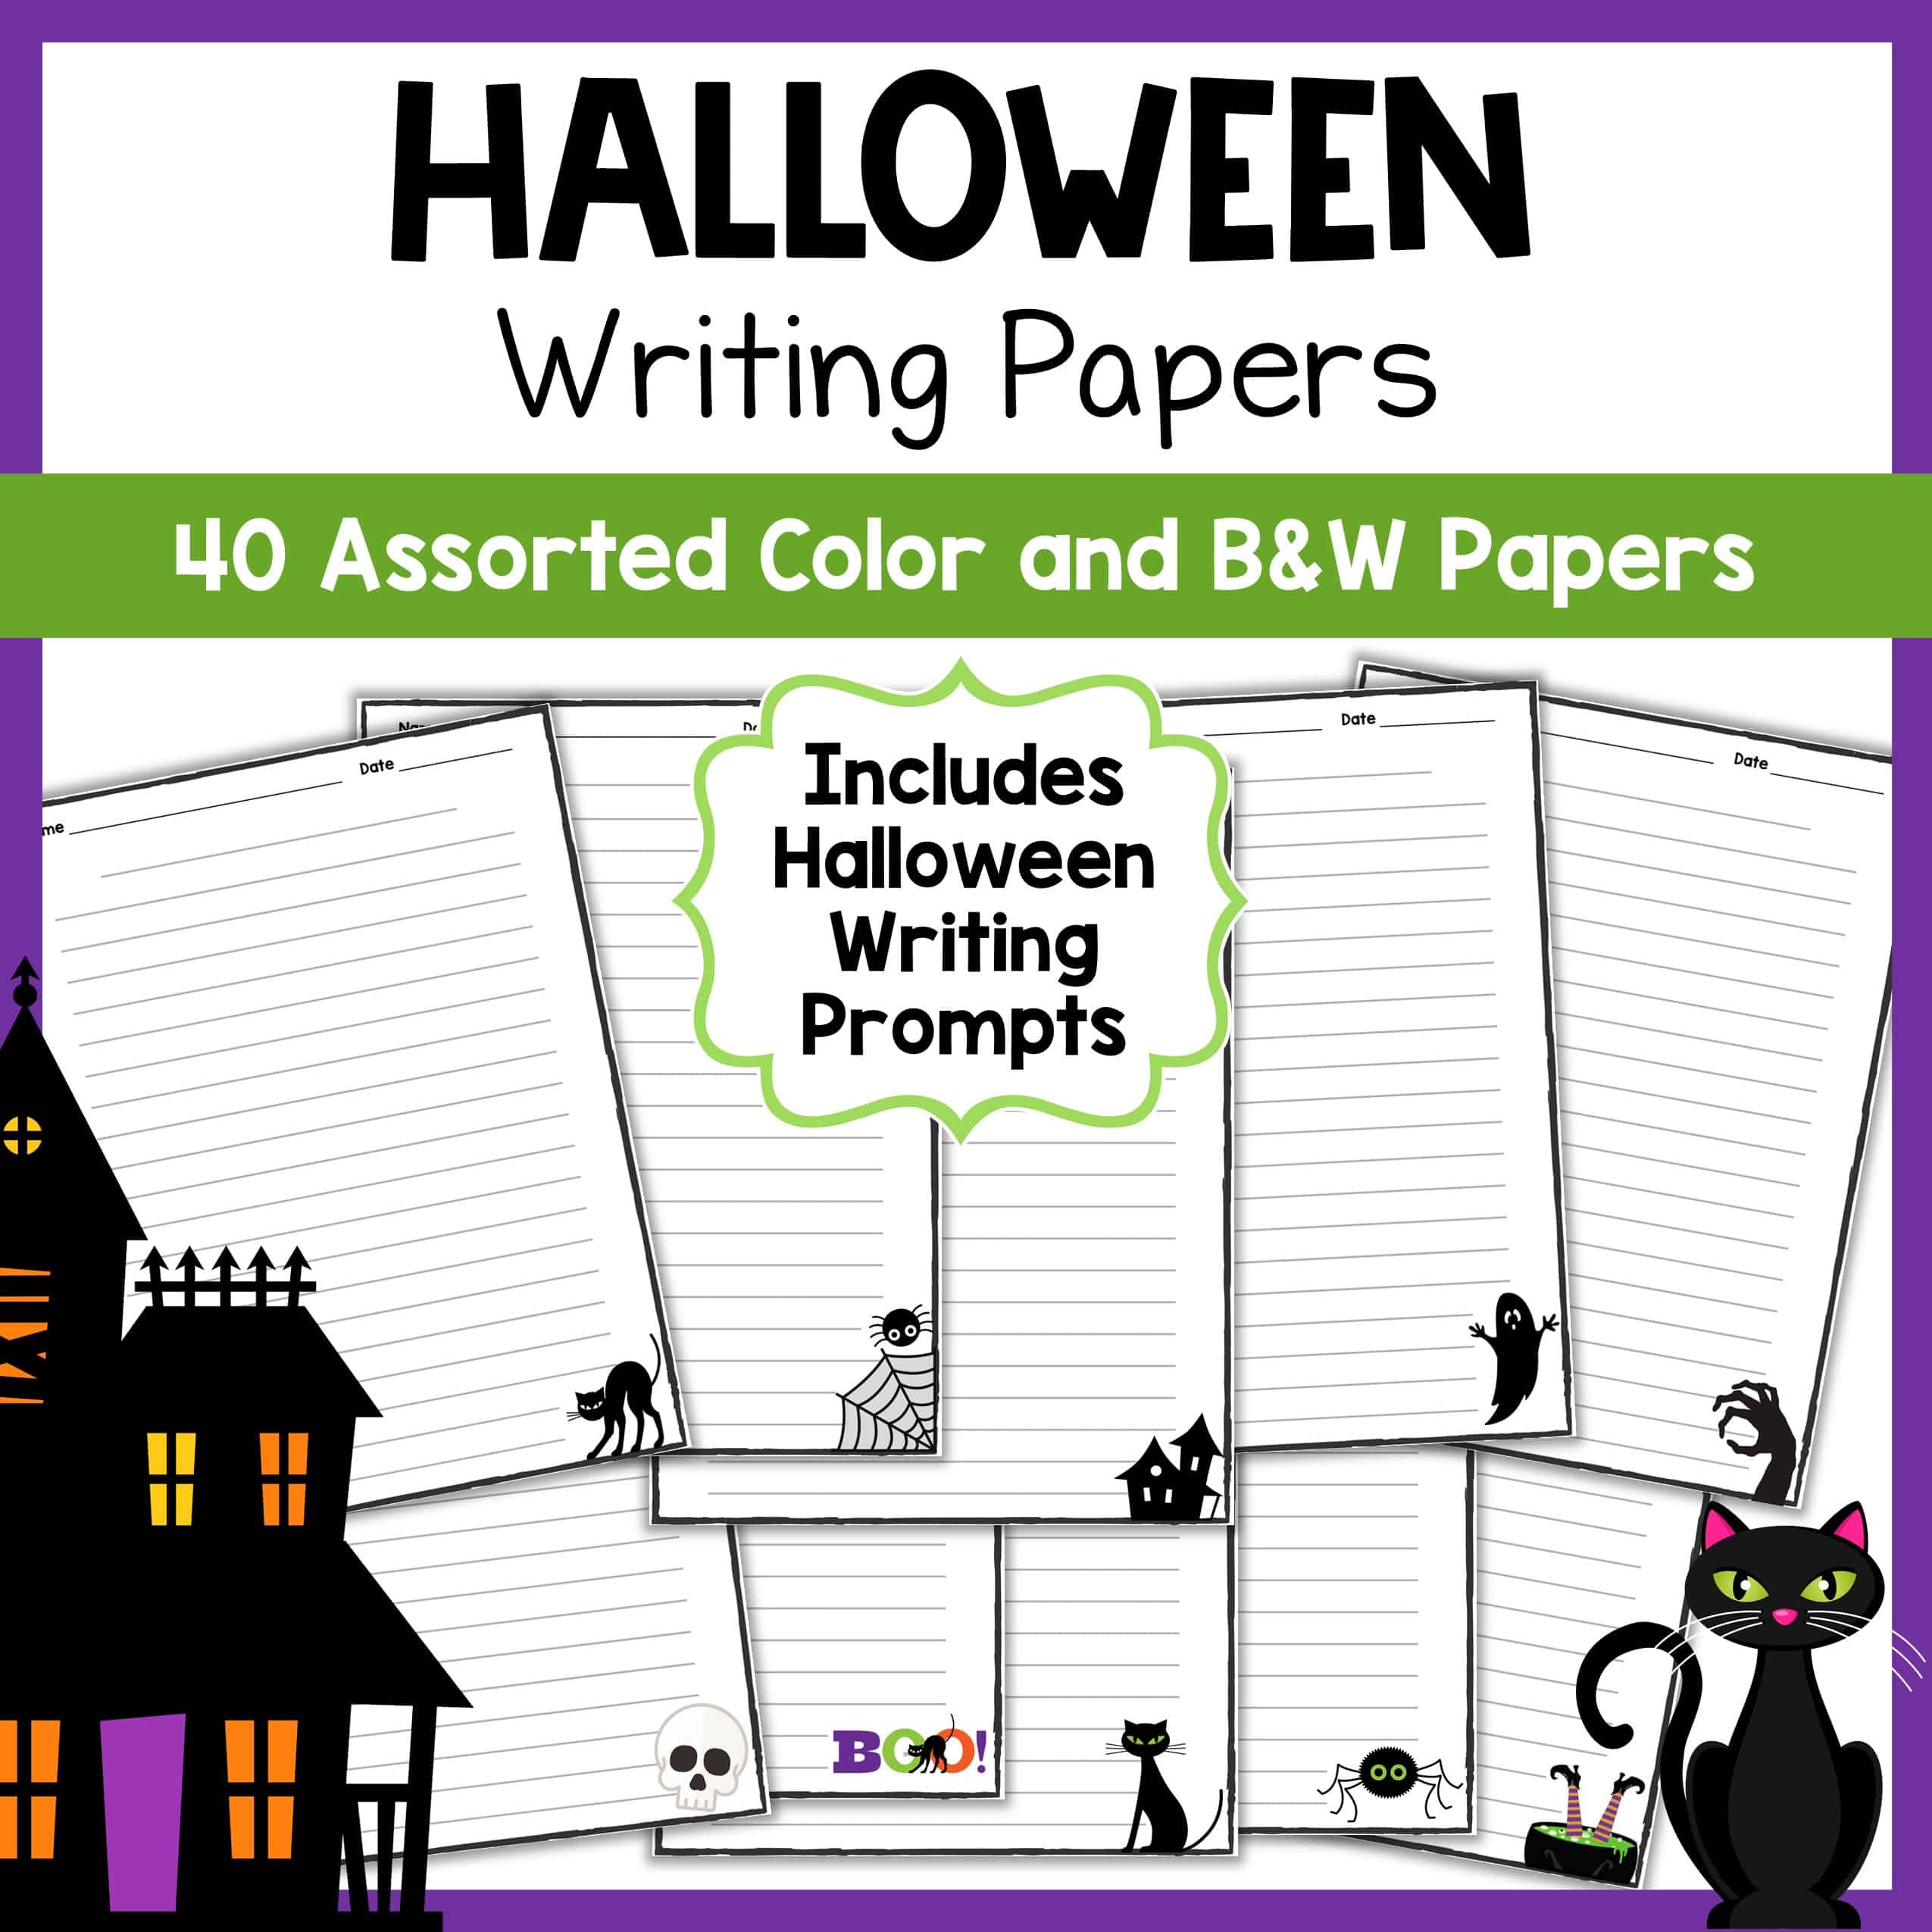 Halloween Writing Papers